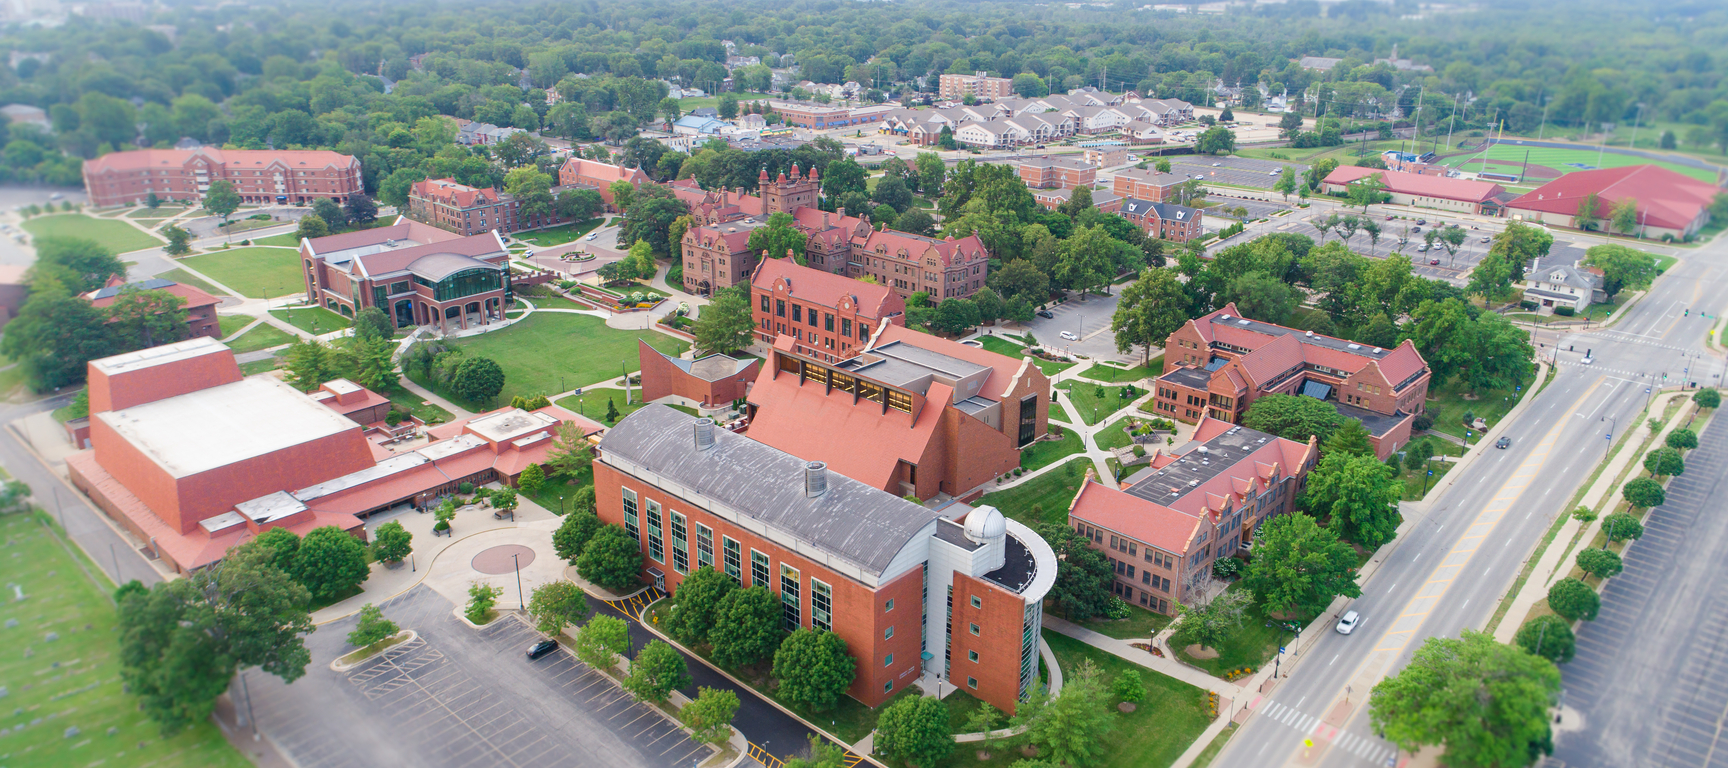 Aerial view of Millikin Campus